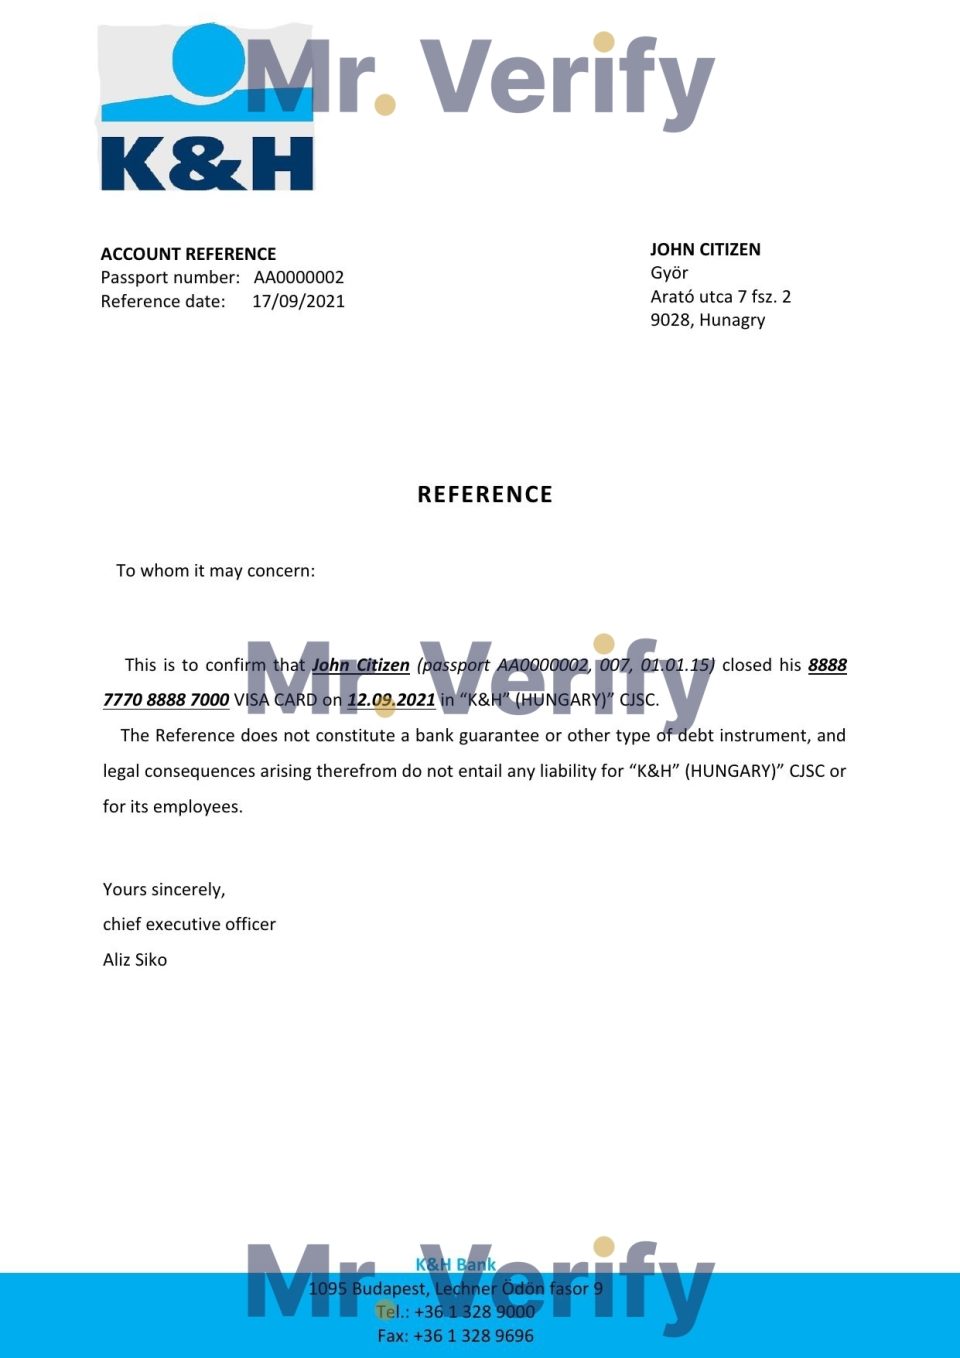 Download Hungary K&H Bank Reference Letter Templates | Editable Word